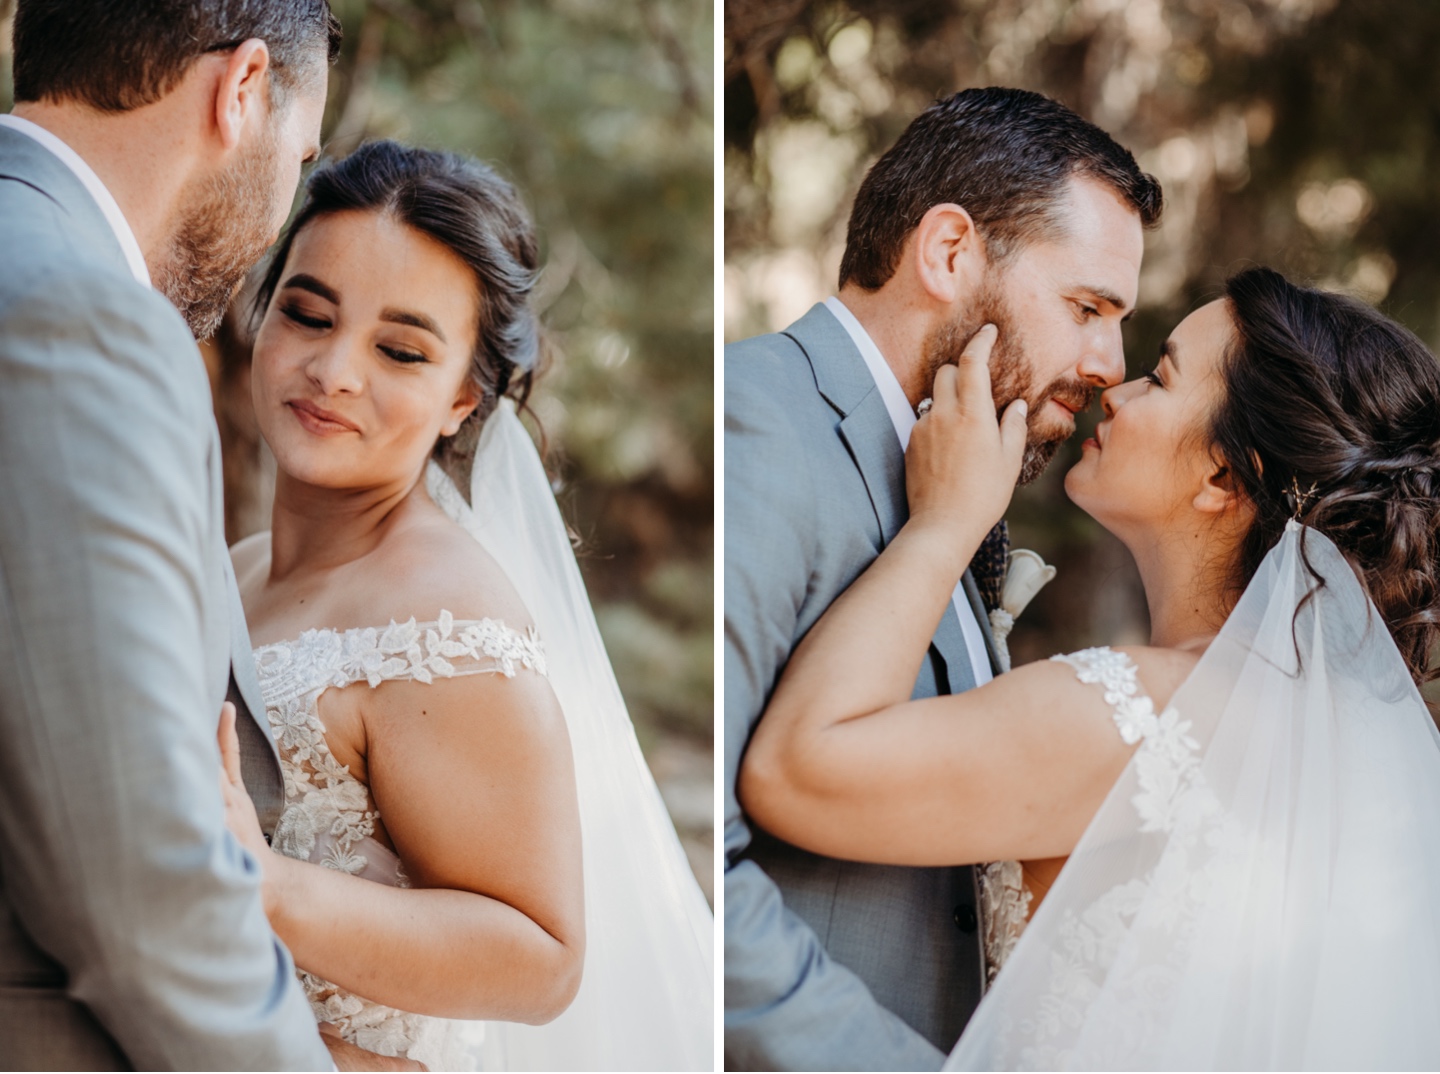 Groom whispers in his bride's ear and they lean in for a kiss after their Yosemite elopement.